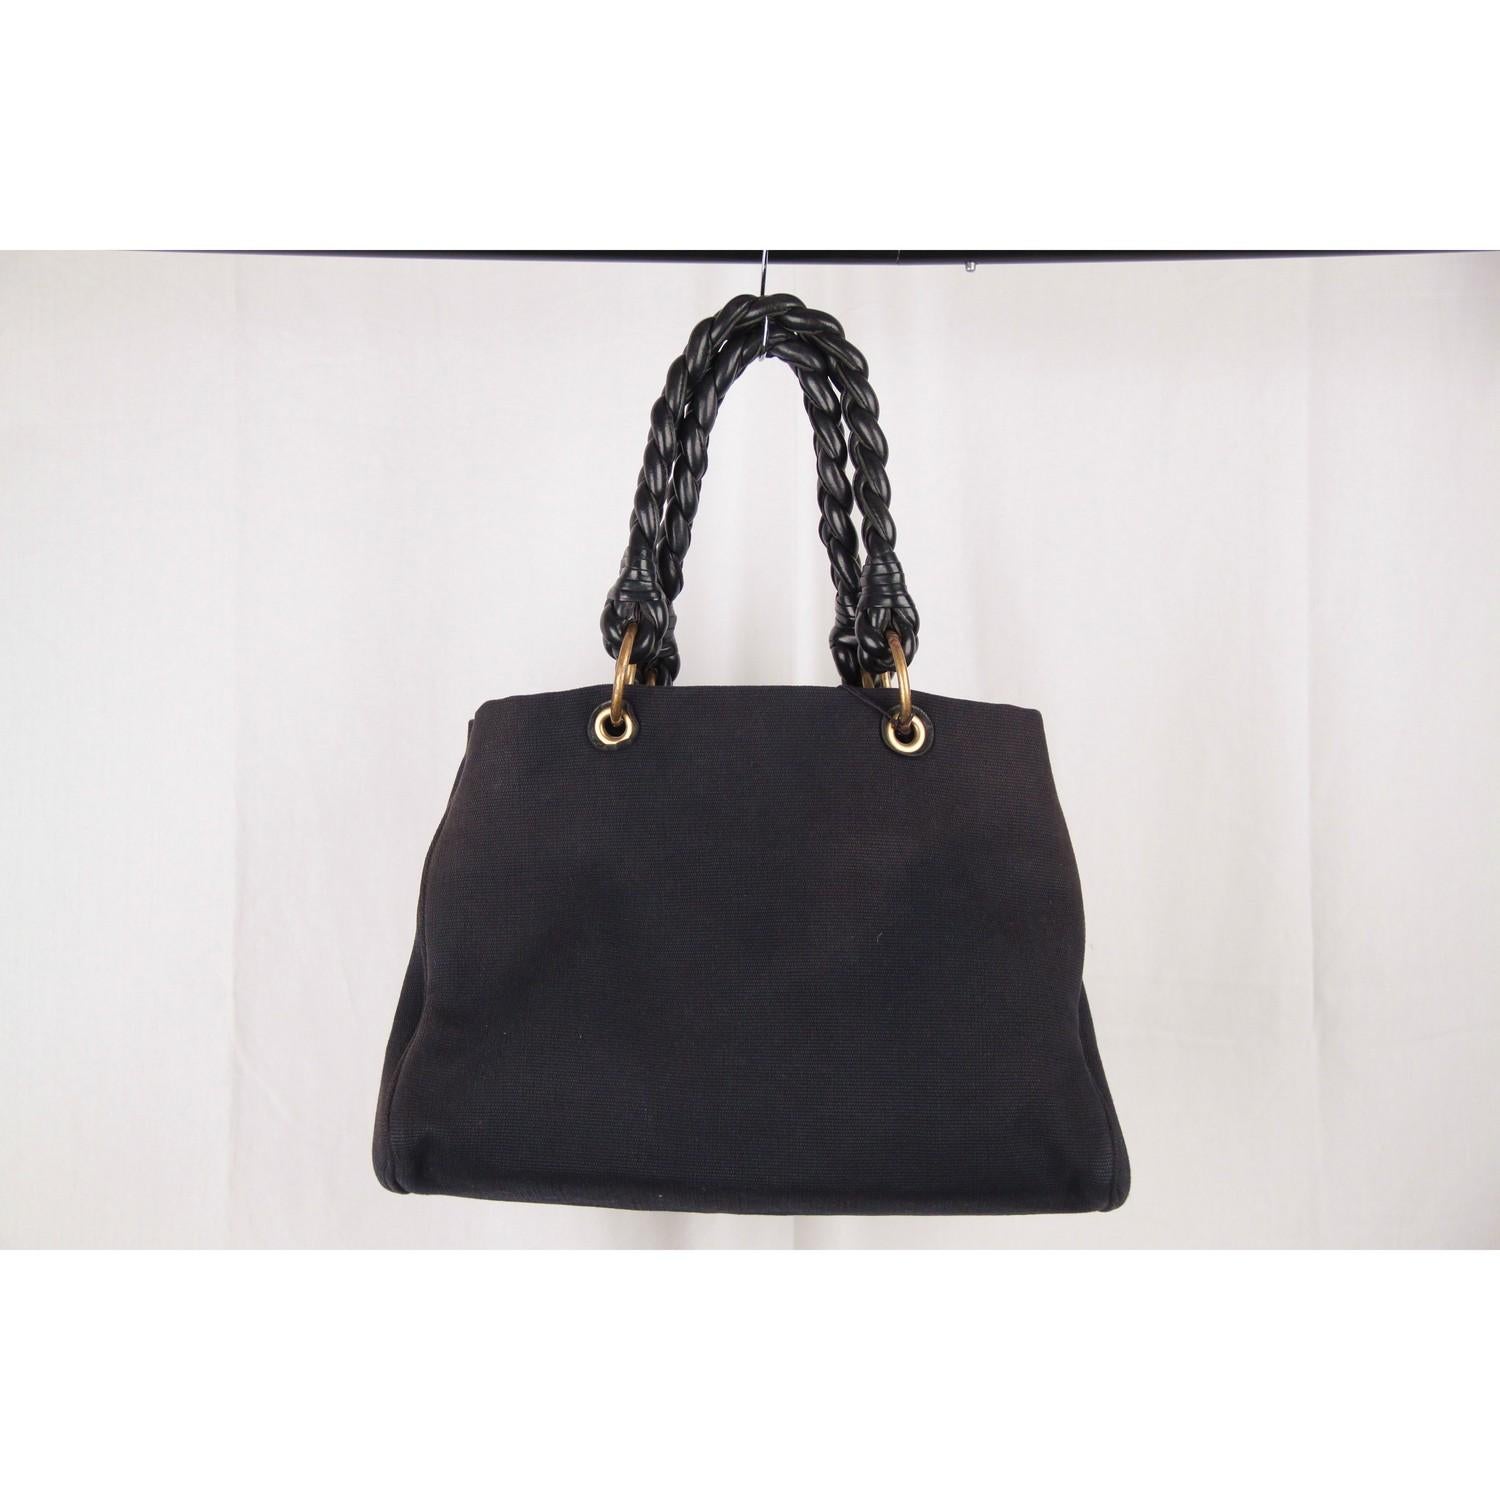 - Black canvas 'Sardegna' tote by BOTTEGA VENETA 
- From 2009 Cruise Colletion
- Thick braided leather handles
- Open top 
- Spacious interior 
- Can be further expanded by unsnapping either side 
- Includes Bottega Veneta dustbag
- 'Bottega Veneta